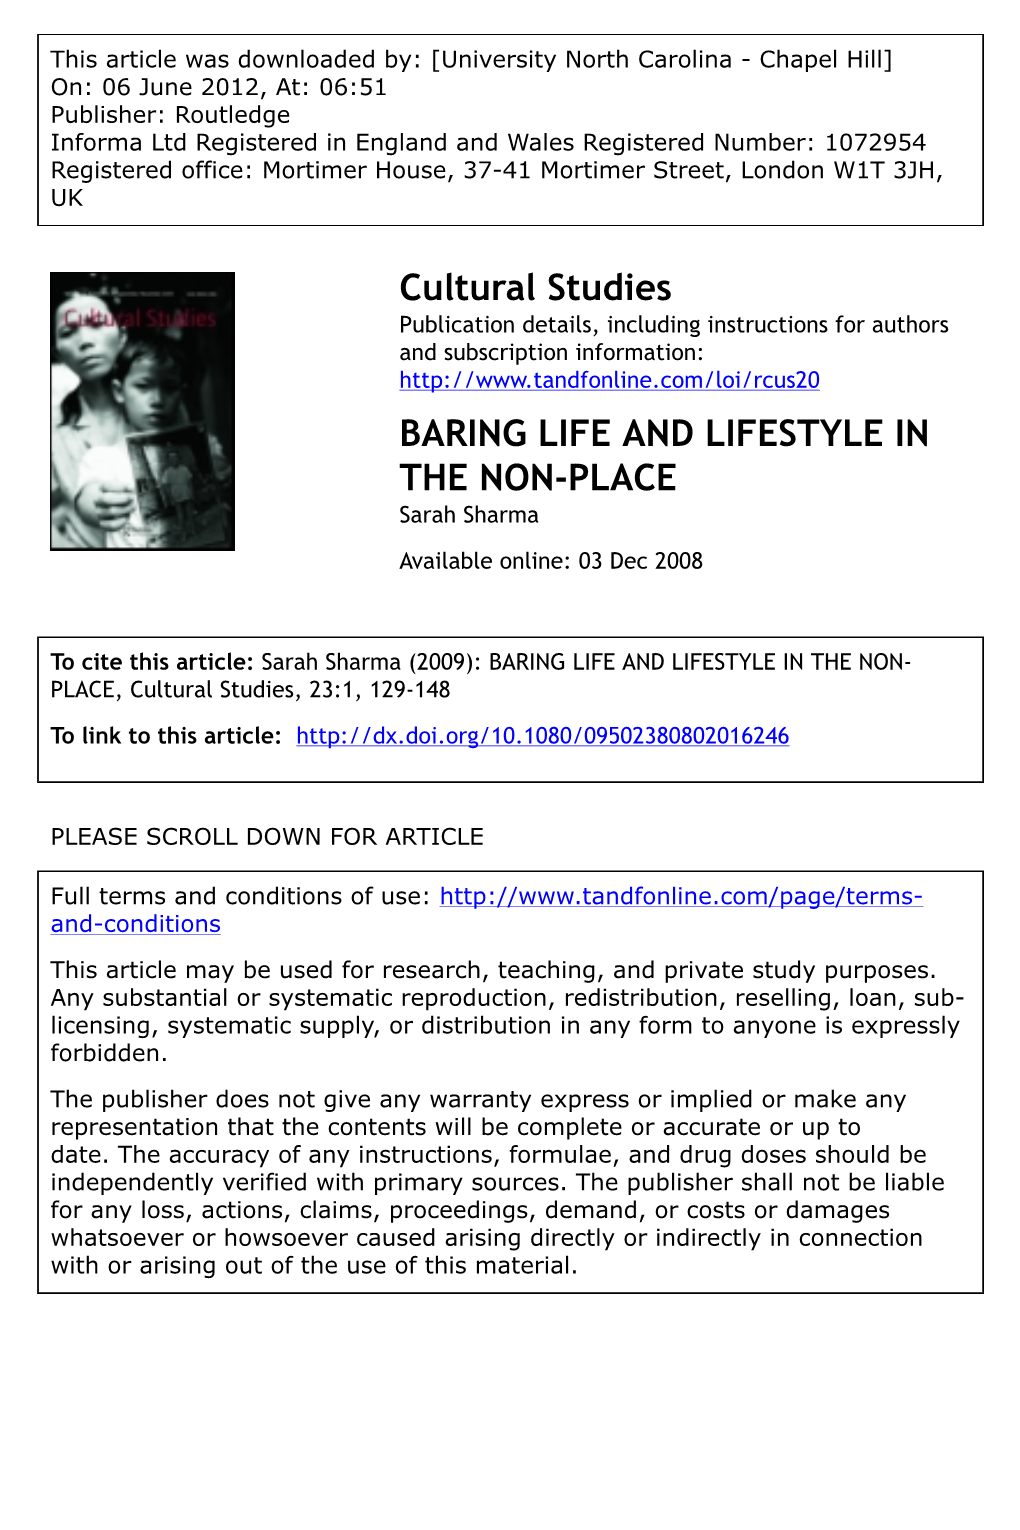 BARING LIFE and LIFESTYLE in the NON-PLACE Sarah Sharma Available Online: 03 Dec 2008